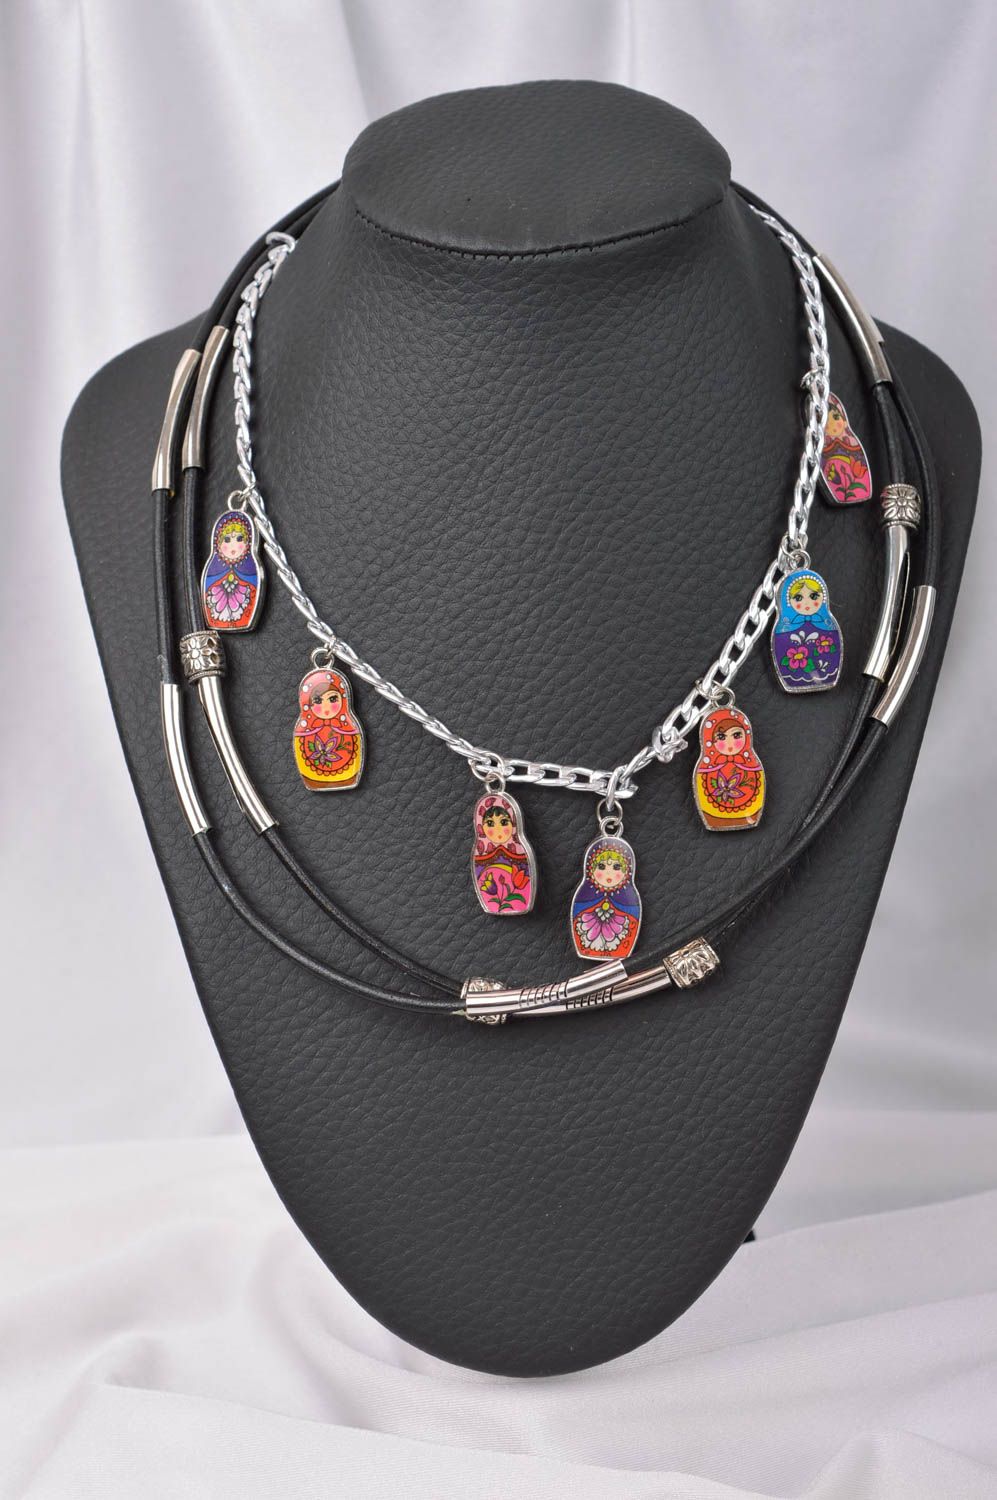 Handmade designer accessory necklace in ethnic style beautiful necklace photo 1